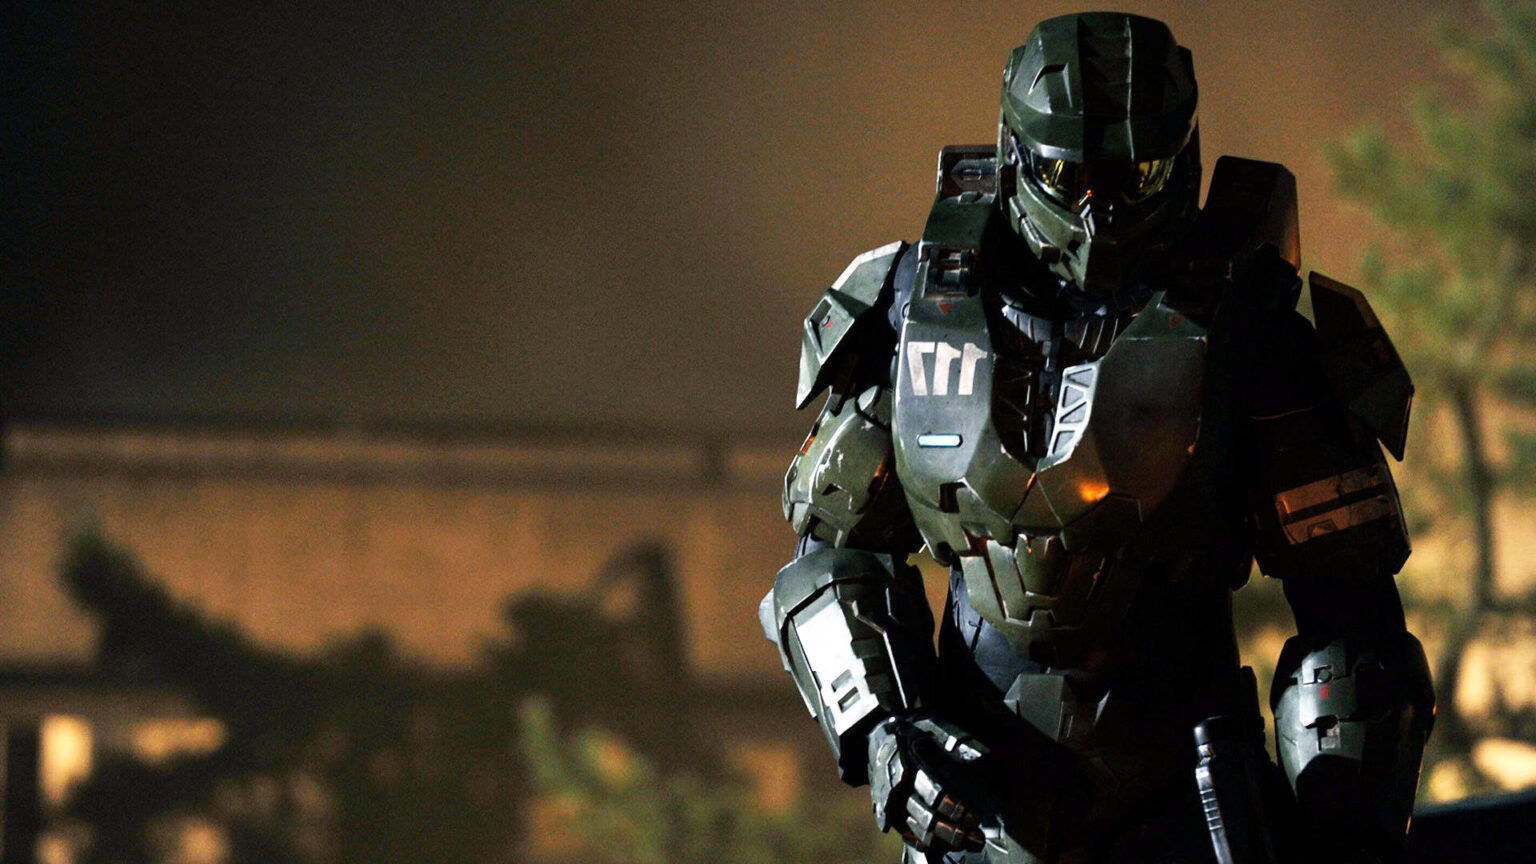 Master Chief has arrived! The highly anticipated Halo TV show will be moving from Showtime to Paramount Plus. Will you check out the video game adaption?